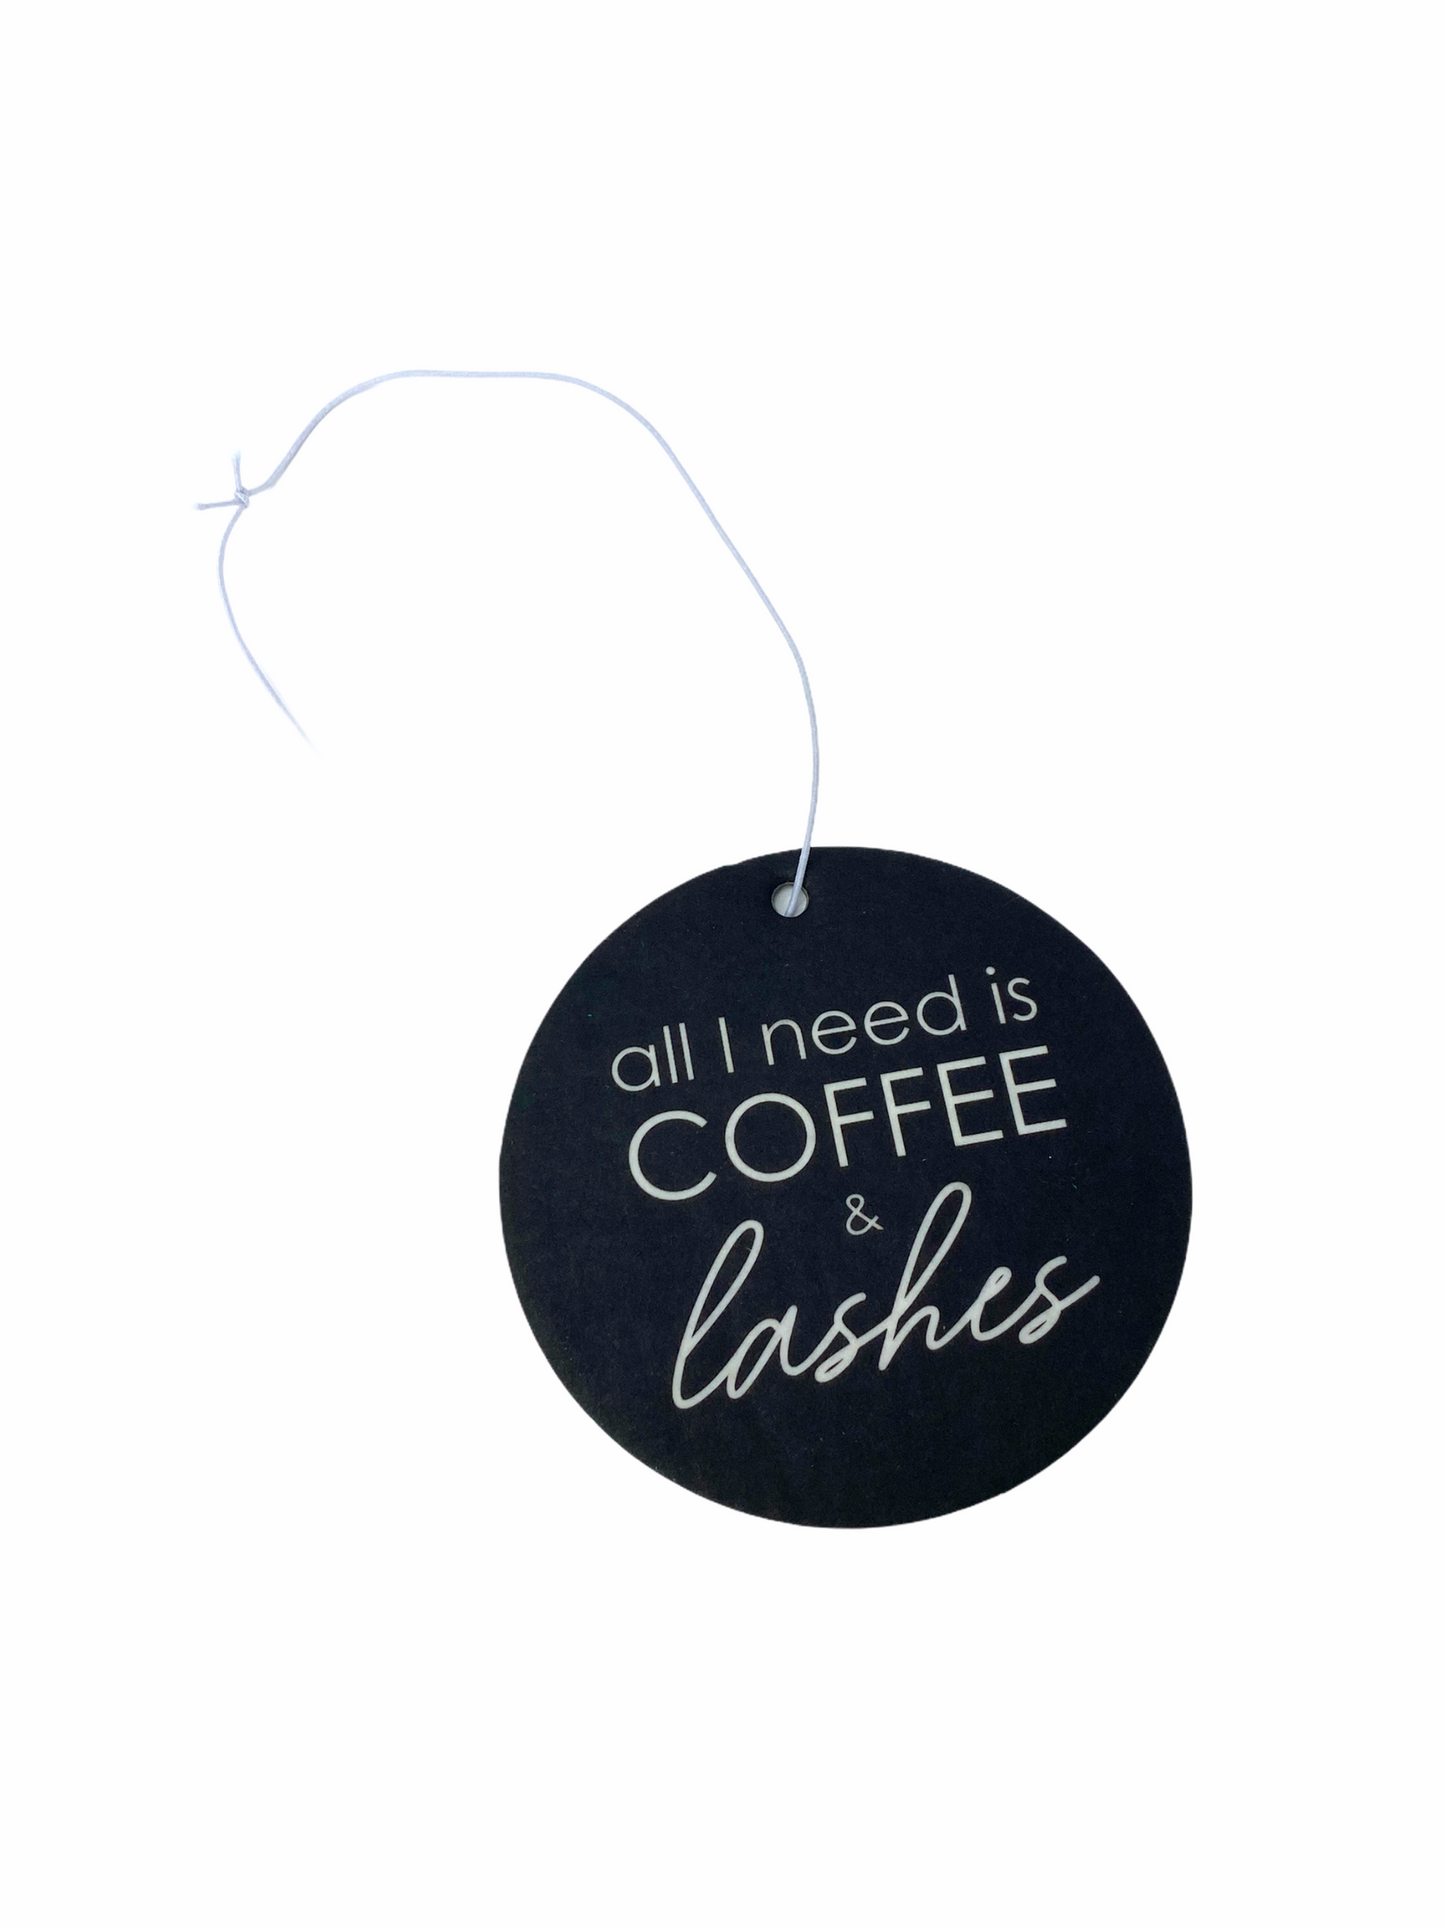 All I need is coffee and lashes - Sweet Coffee Bean Air Freshener